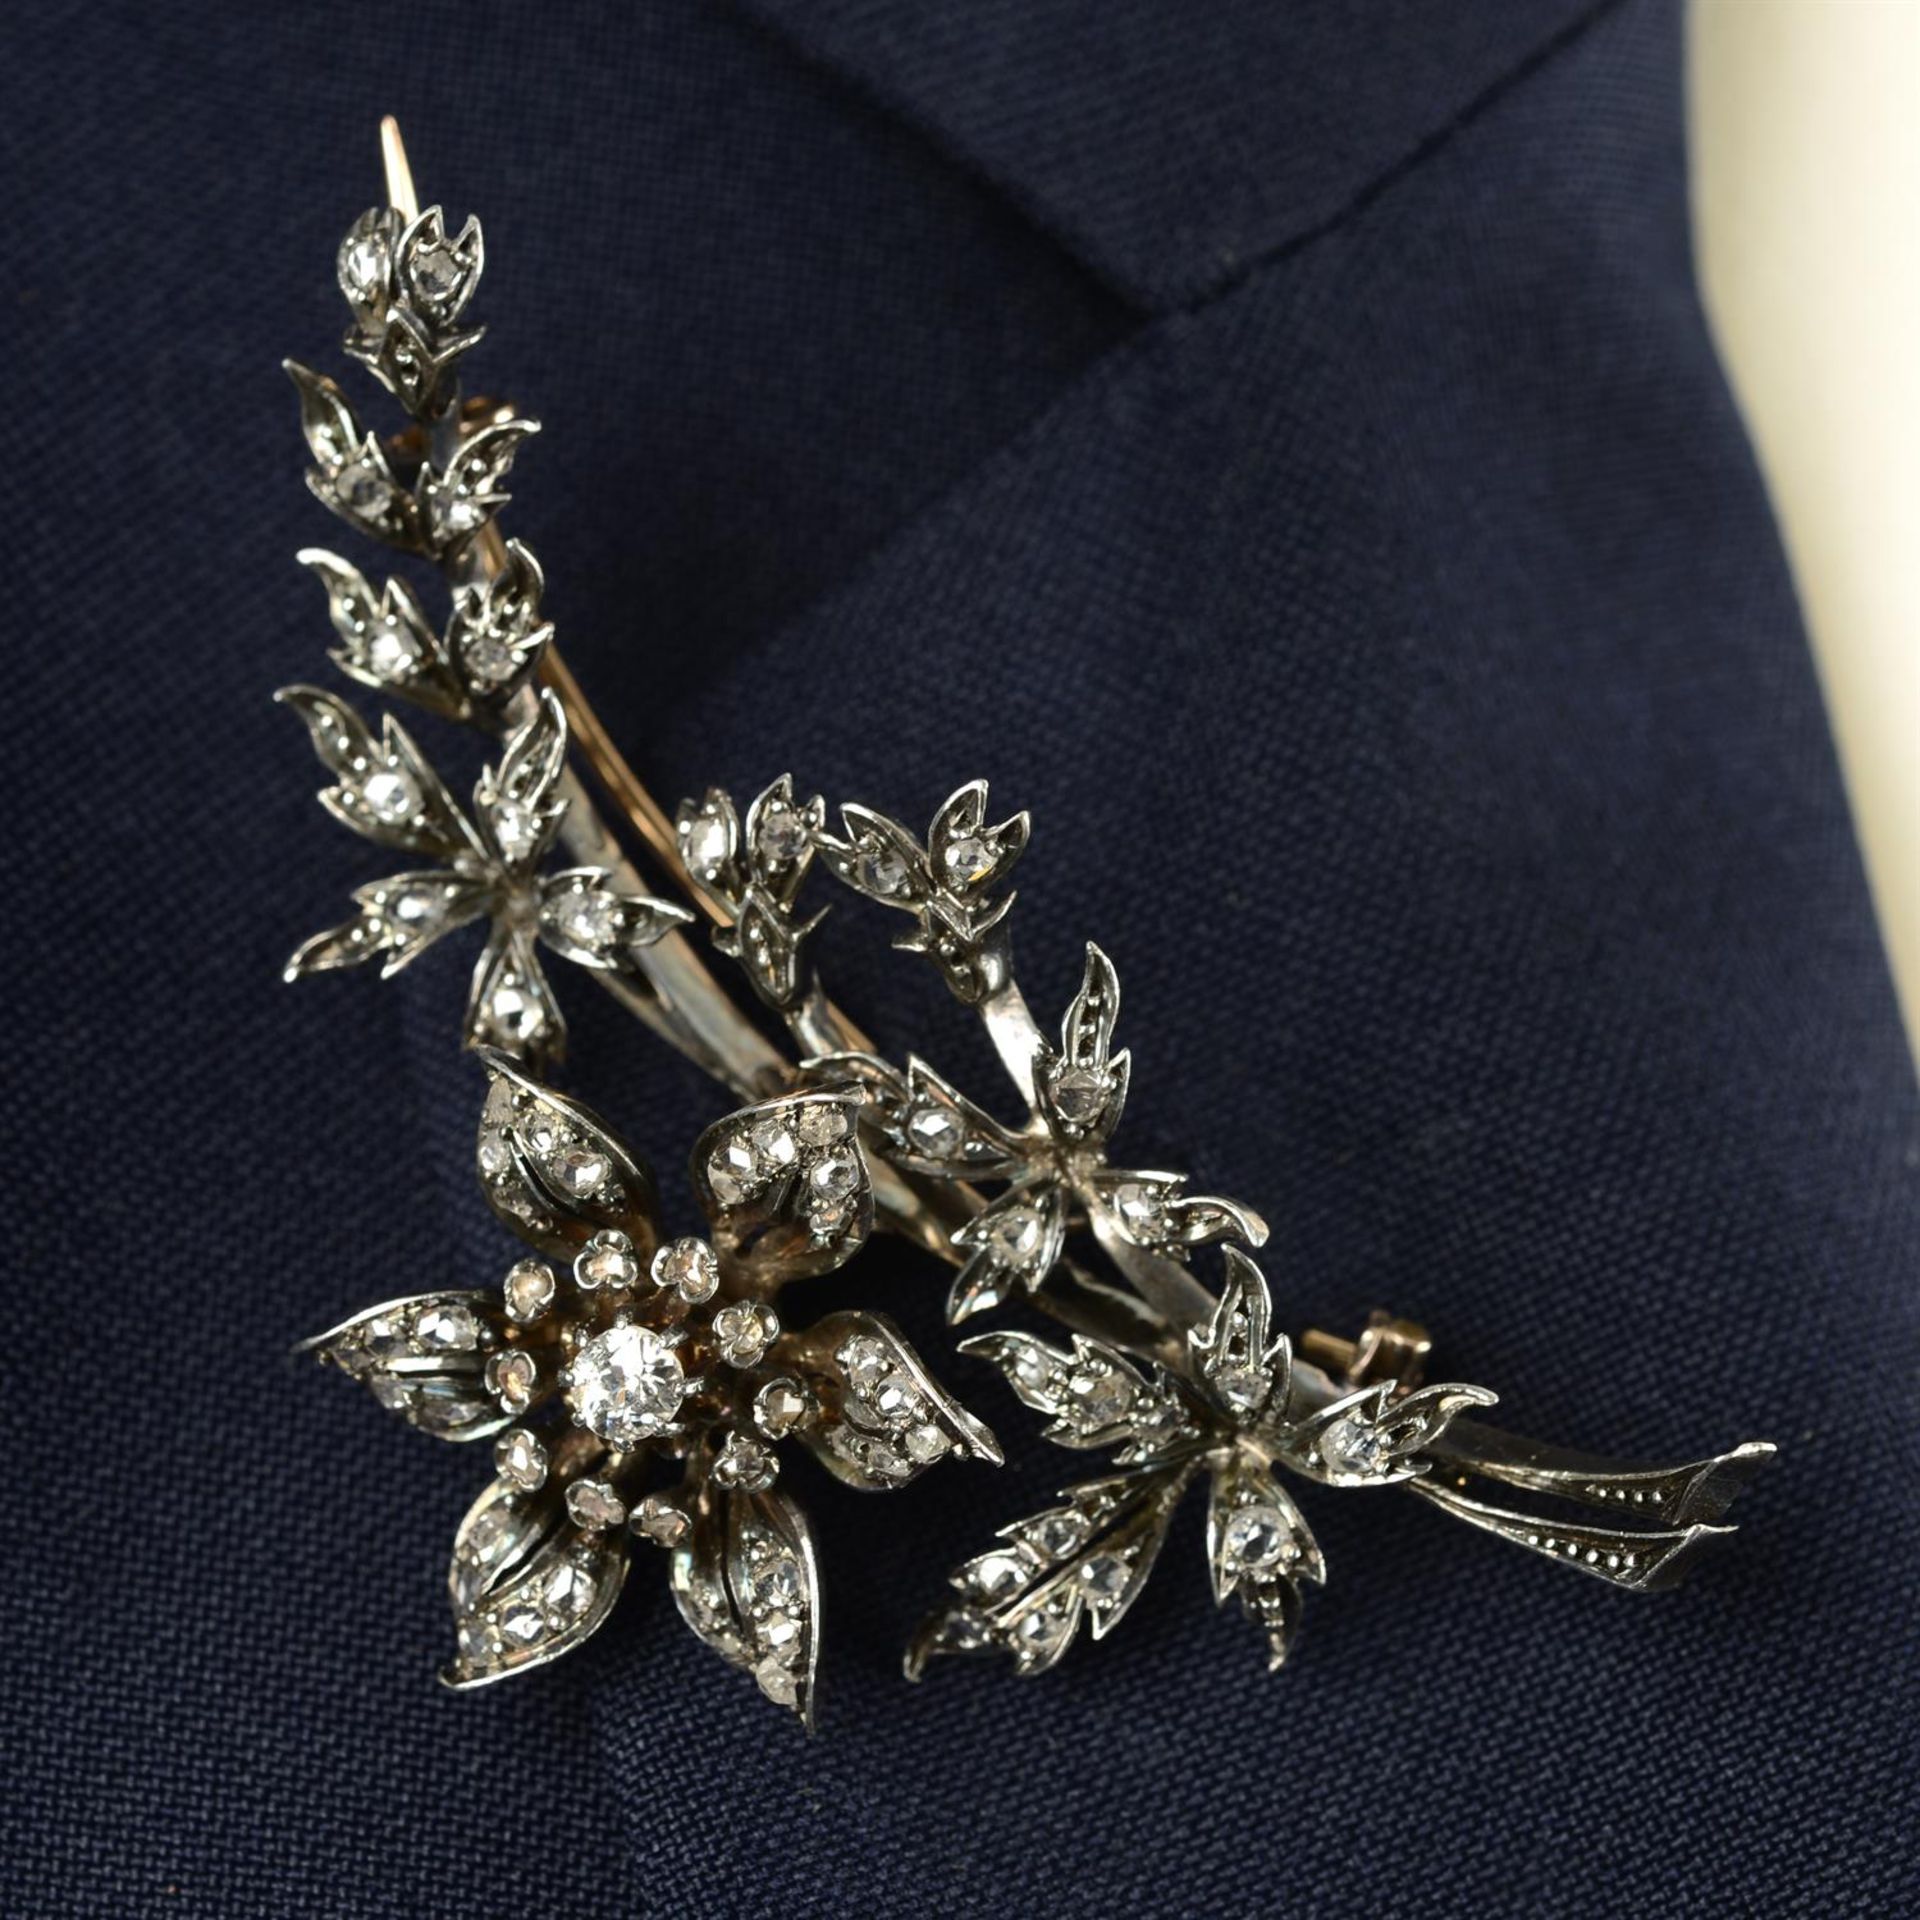 A mid 19th century silver and gold old and rose-cut diamond floral spray brooch, set en tremblant.